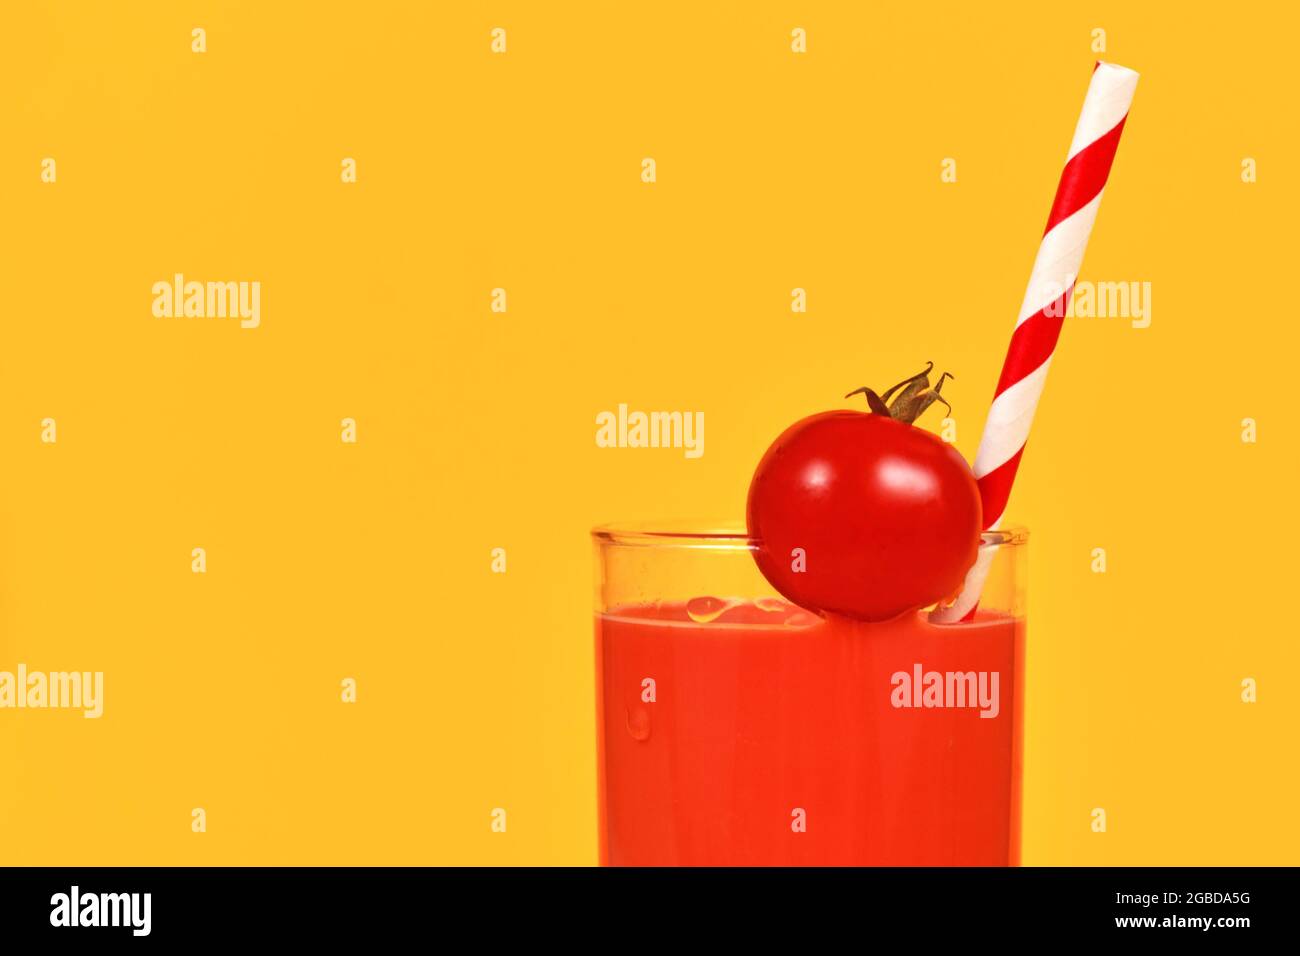 Glass with red tomato juice, cherry tomato and striped drinking straw on side of yellow background with copy space Stock Photo